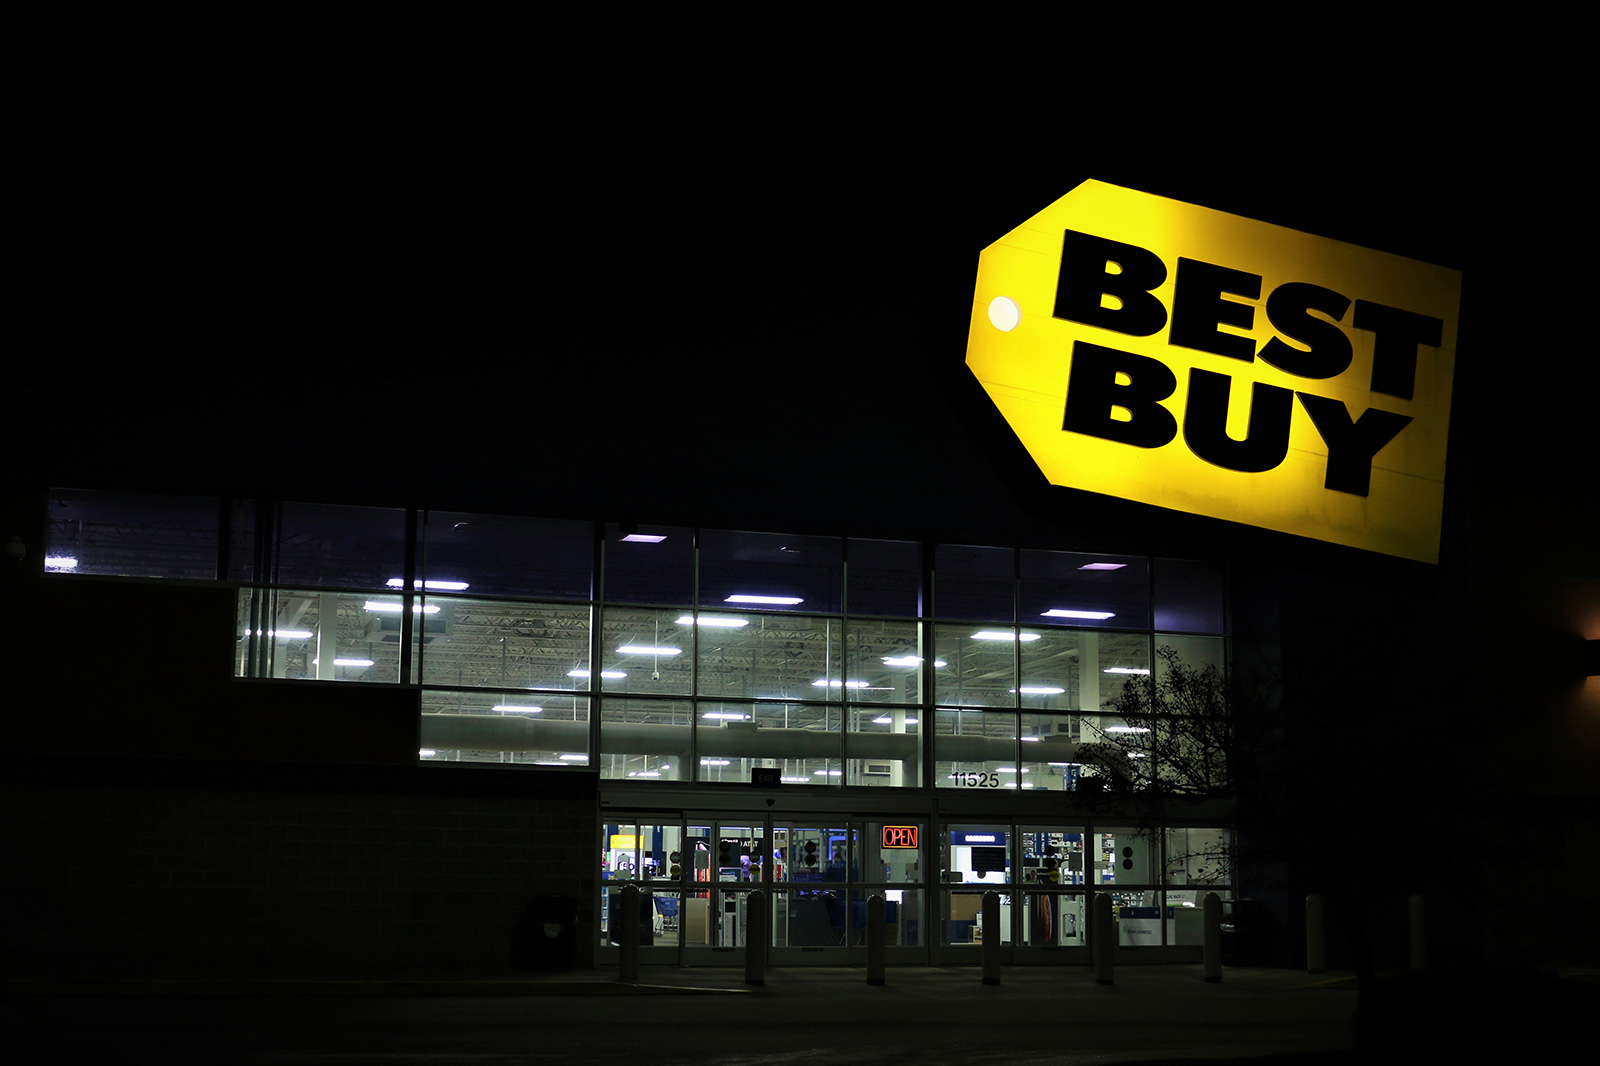 Best Buy’s big sale is packed with great deals today here’s our top